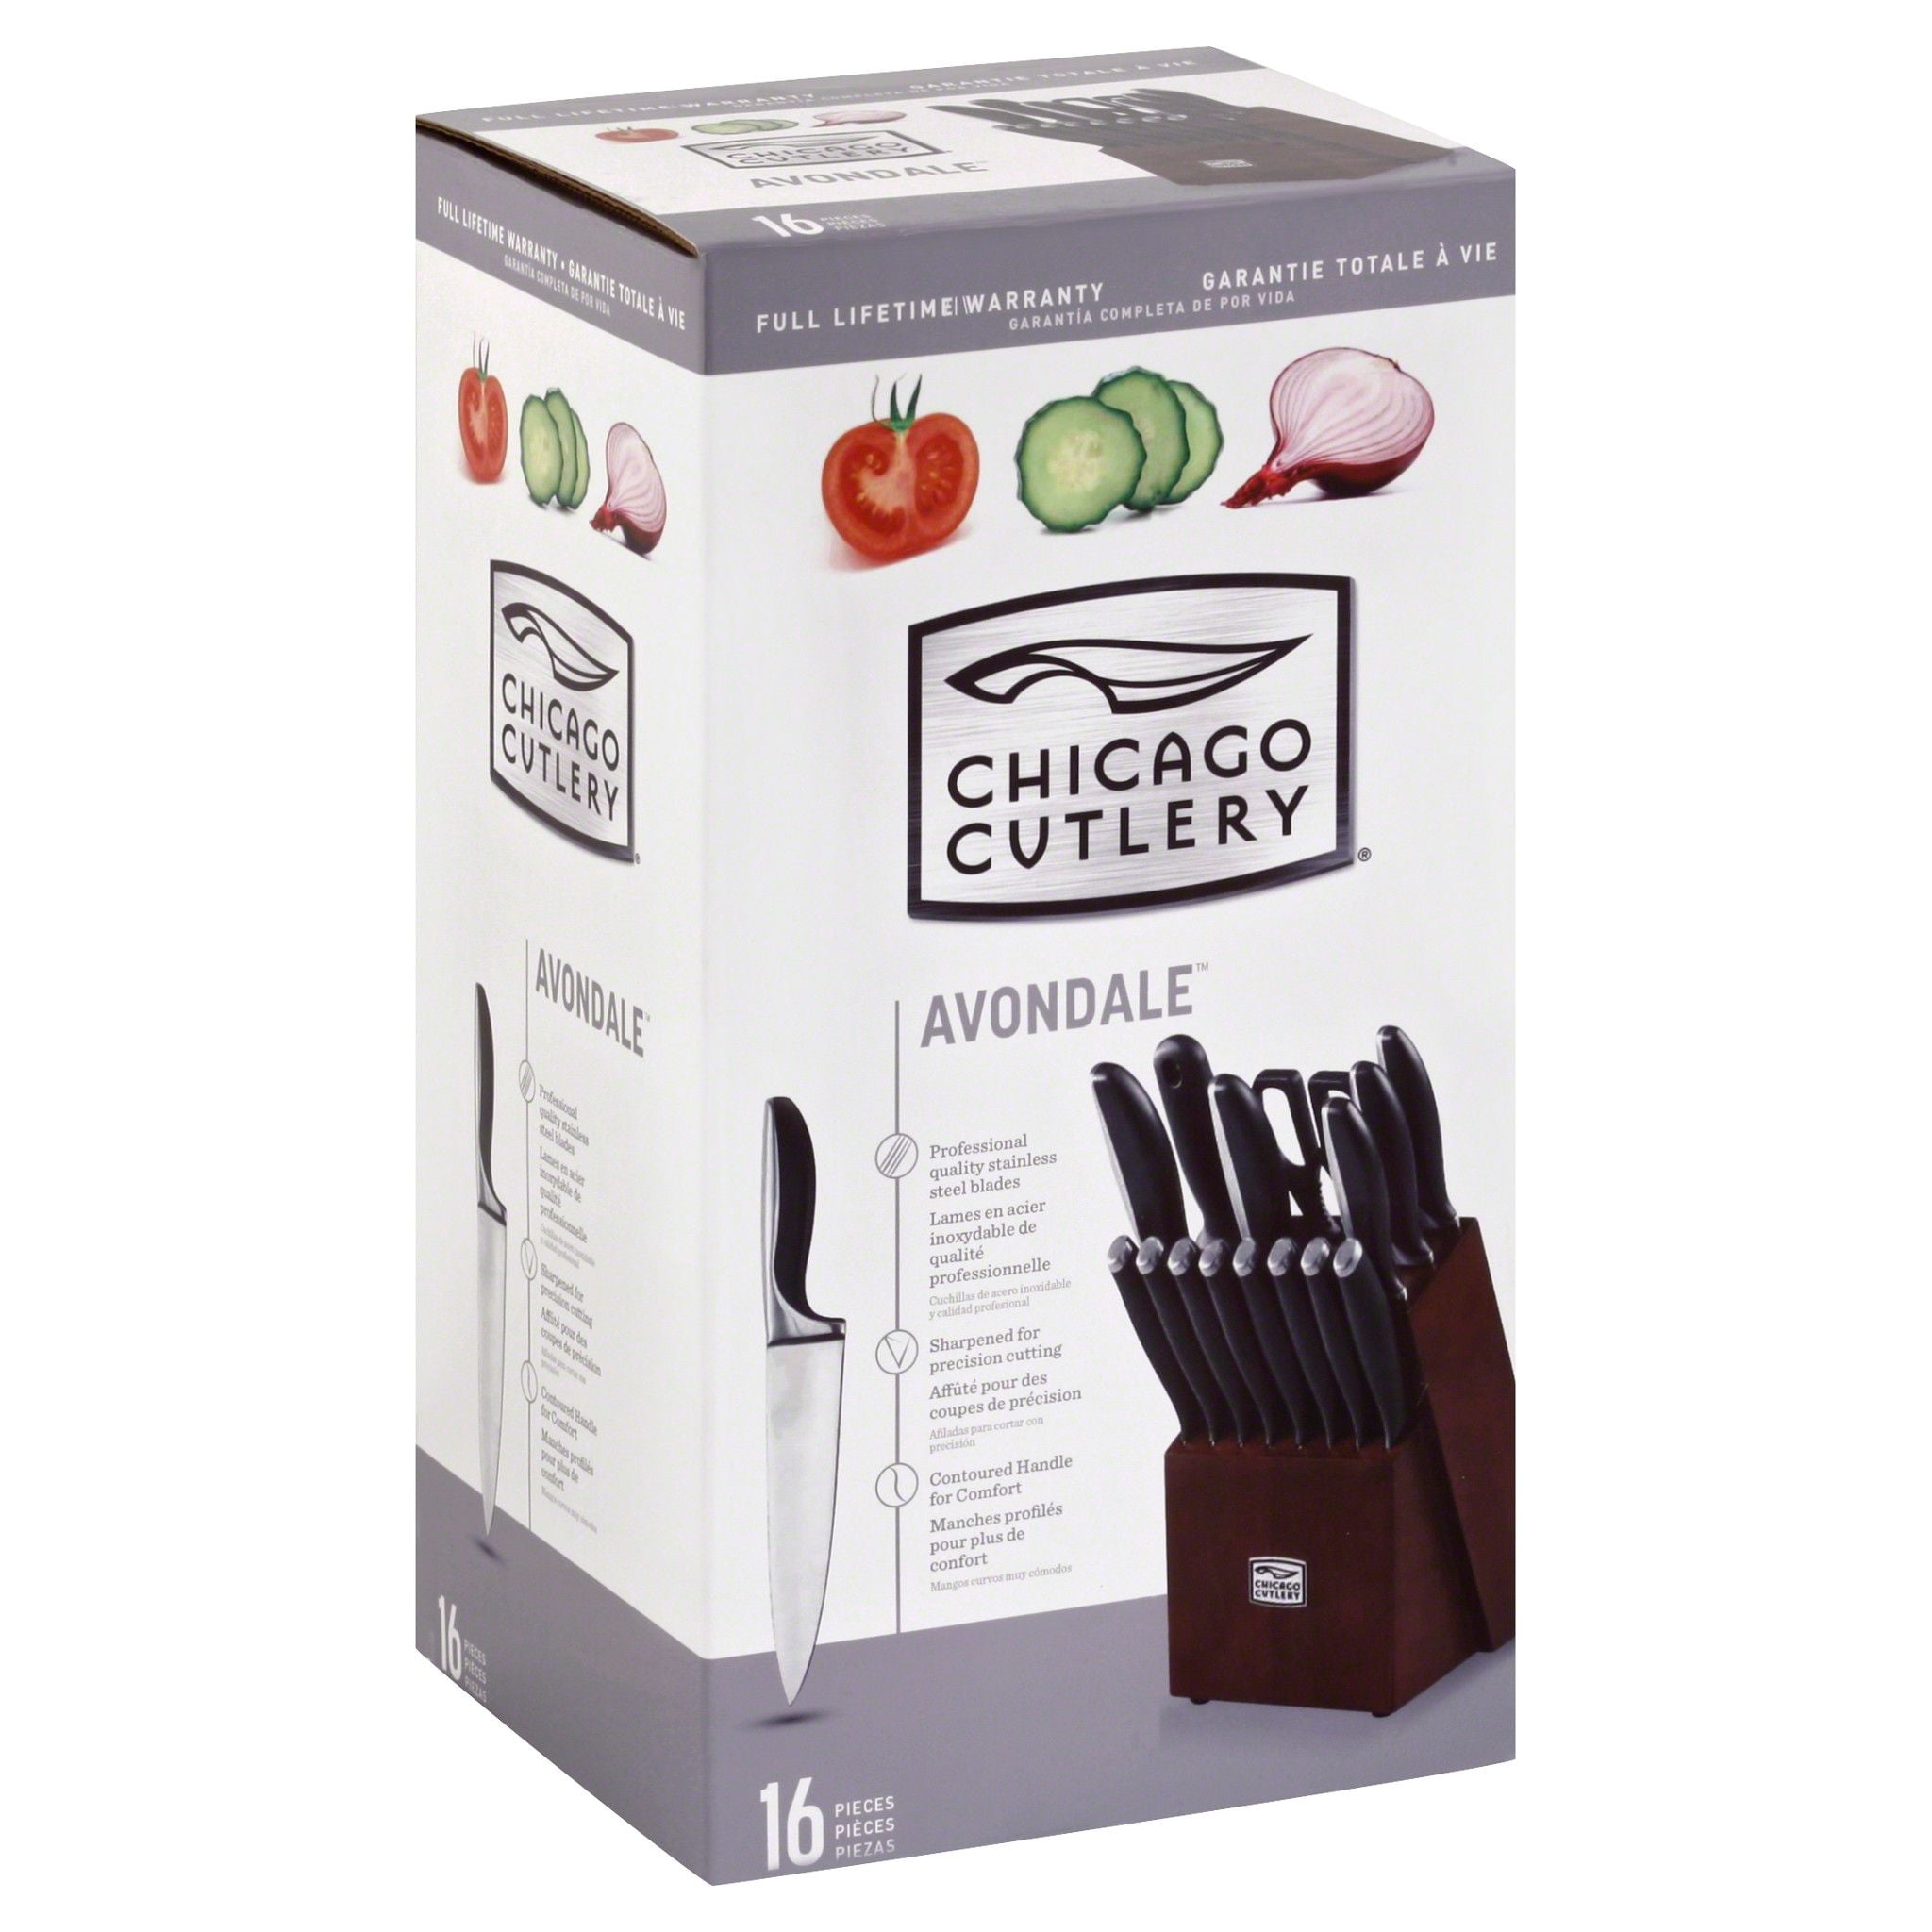  Chicago Cutlery Malden (16-PC) Kitchen Knife Block Set With  Wooden Block & Built-In Sharpener, Contoured Handles and Sharp Stainless  Steel Professional Chef Knife Set & Scissors: Home & Kitchen